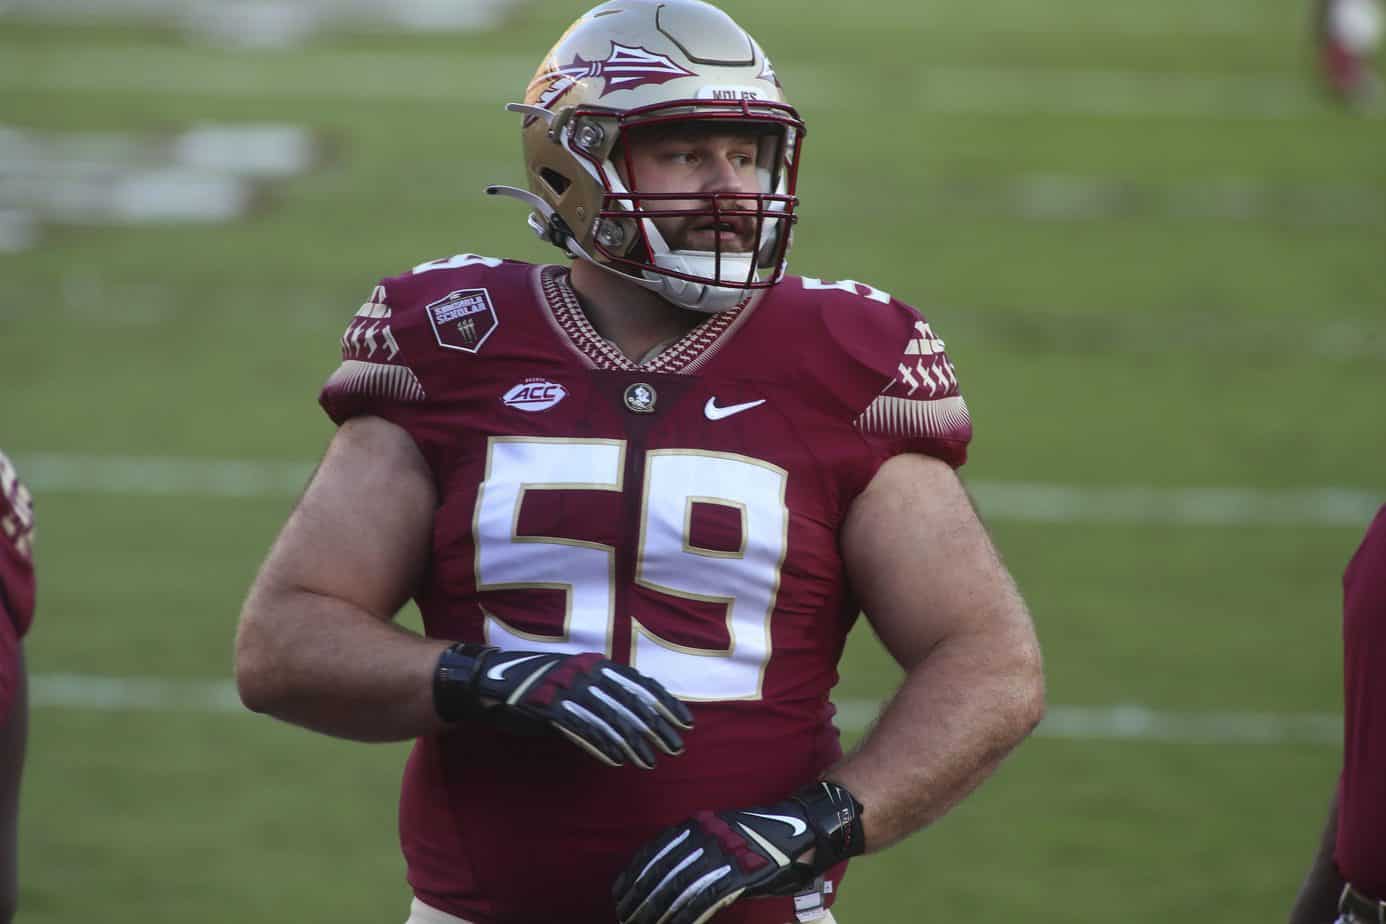 Florida State offensive lineman Brady Scott responded to criticism from Barstool Sports about proposing following the Jacksonville State loss